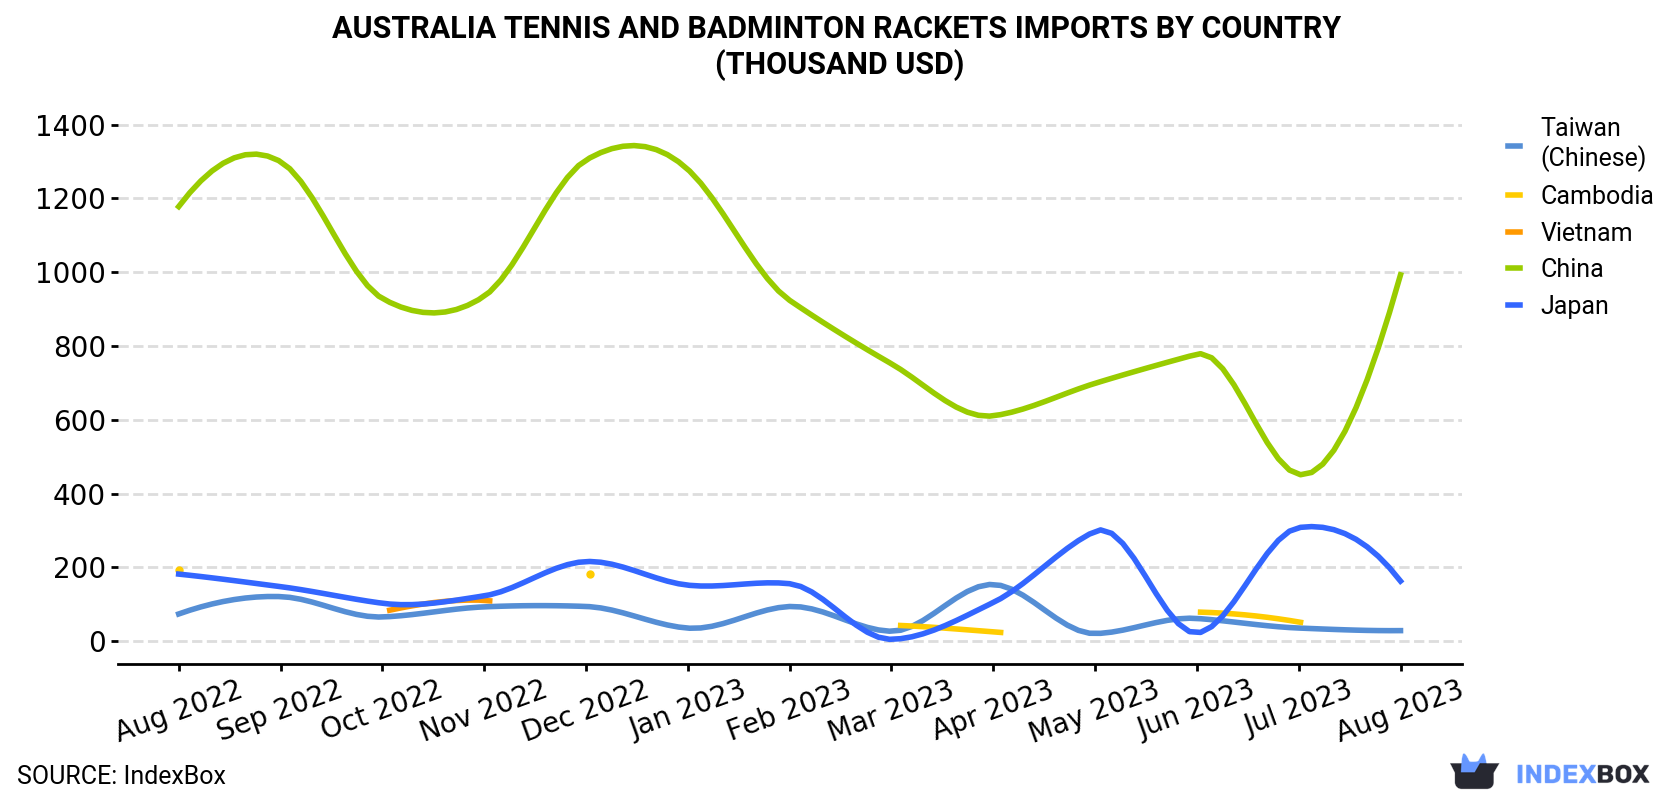 Australia Tennis And Badminton Rackets Imports By Country (Thousand USD)